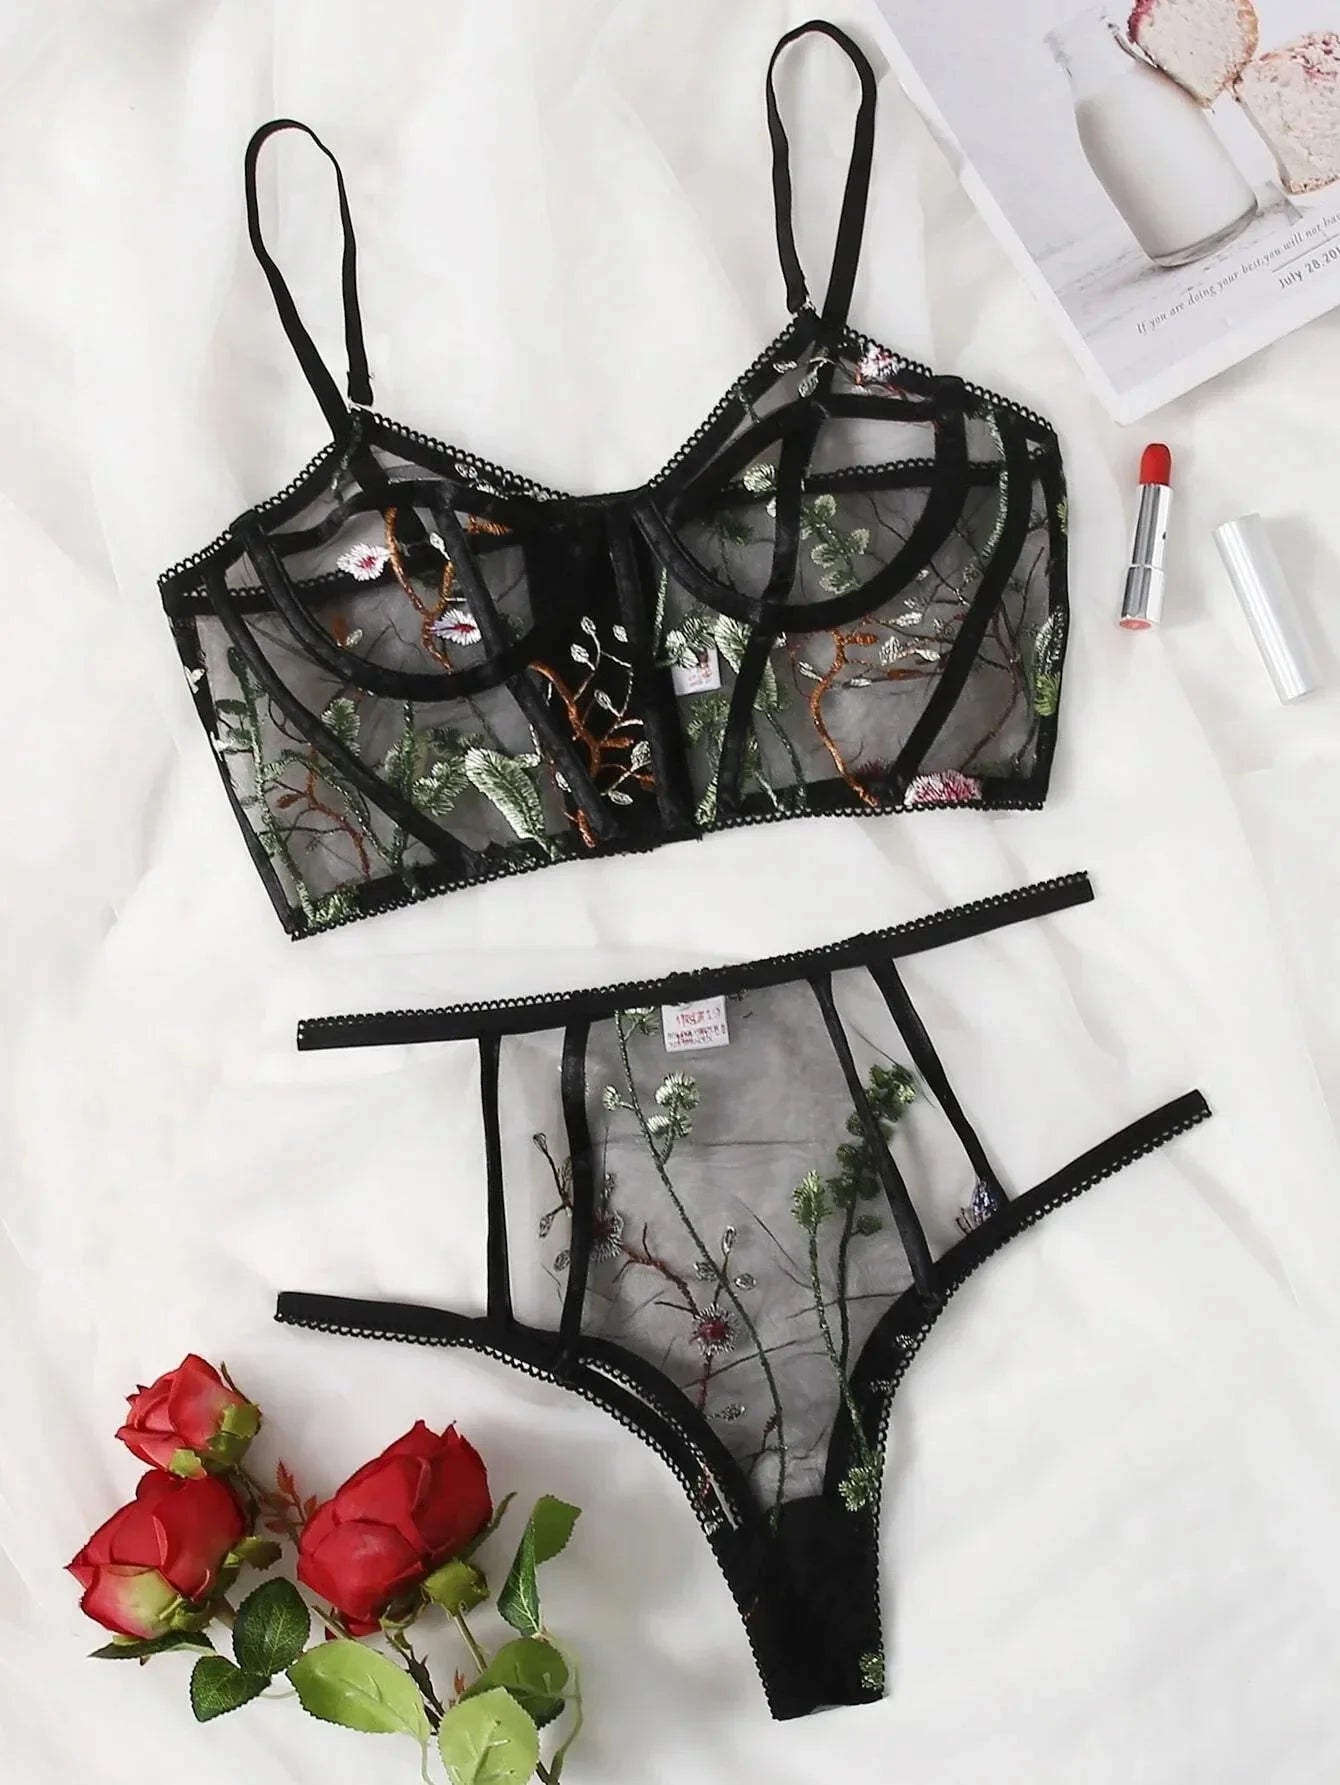 Sexy Lingerie Flower Embroidery Lingerie For Women Sexy Naughty Plus Size G-string Thong Underwear Sleepwear lenceria para damas